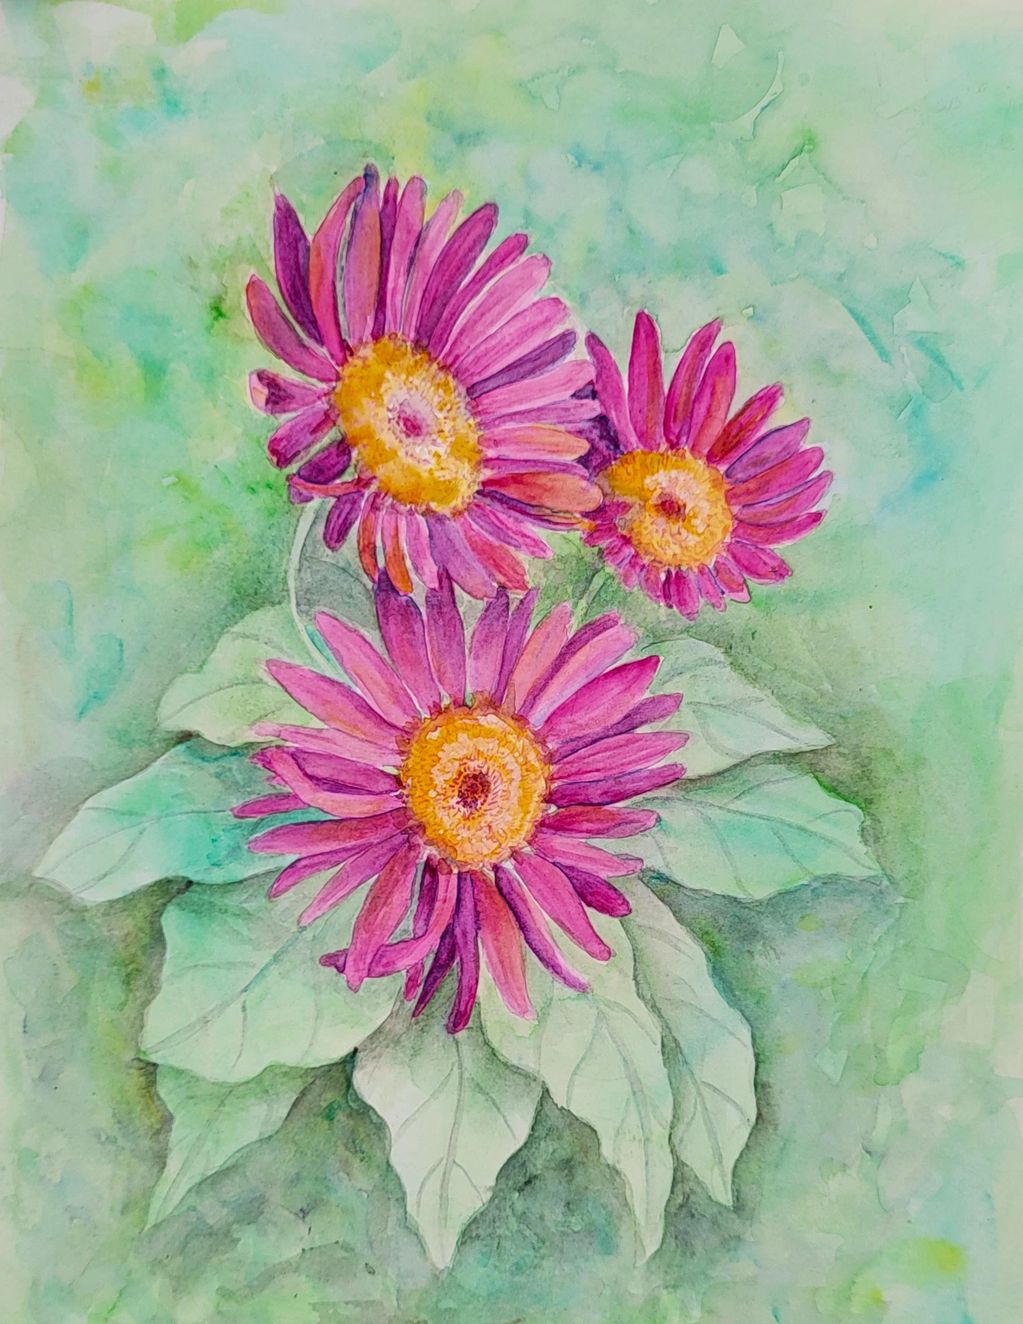 More Pink - A Touch of Pink Trio of Spring - original watercolor painting